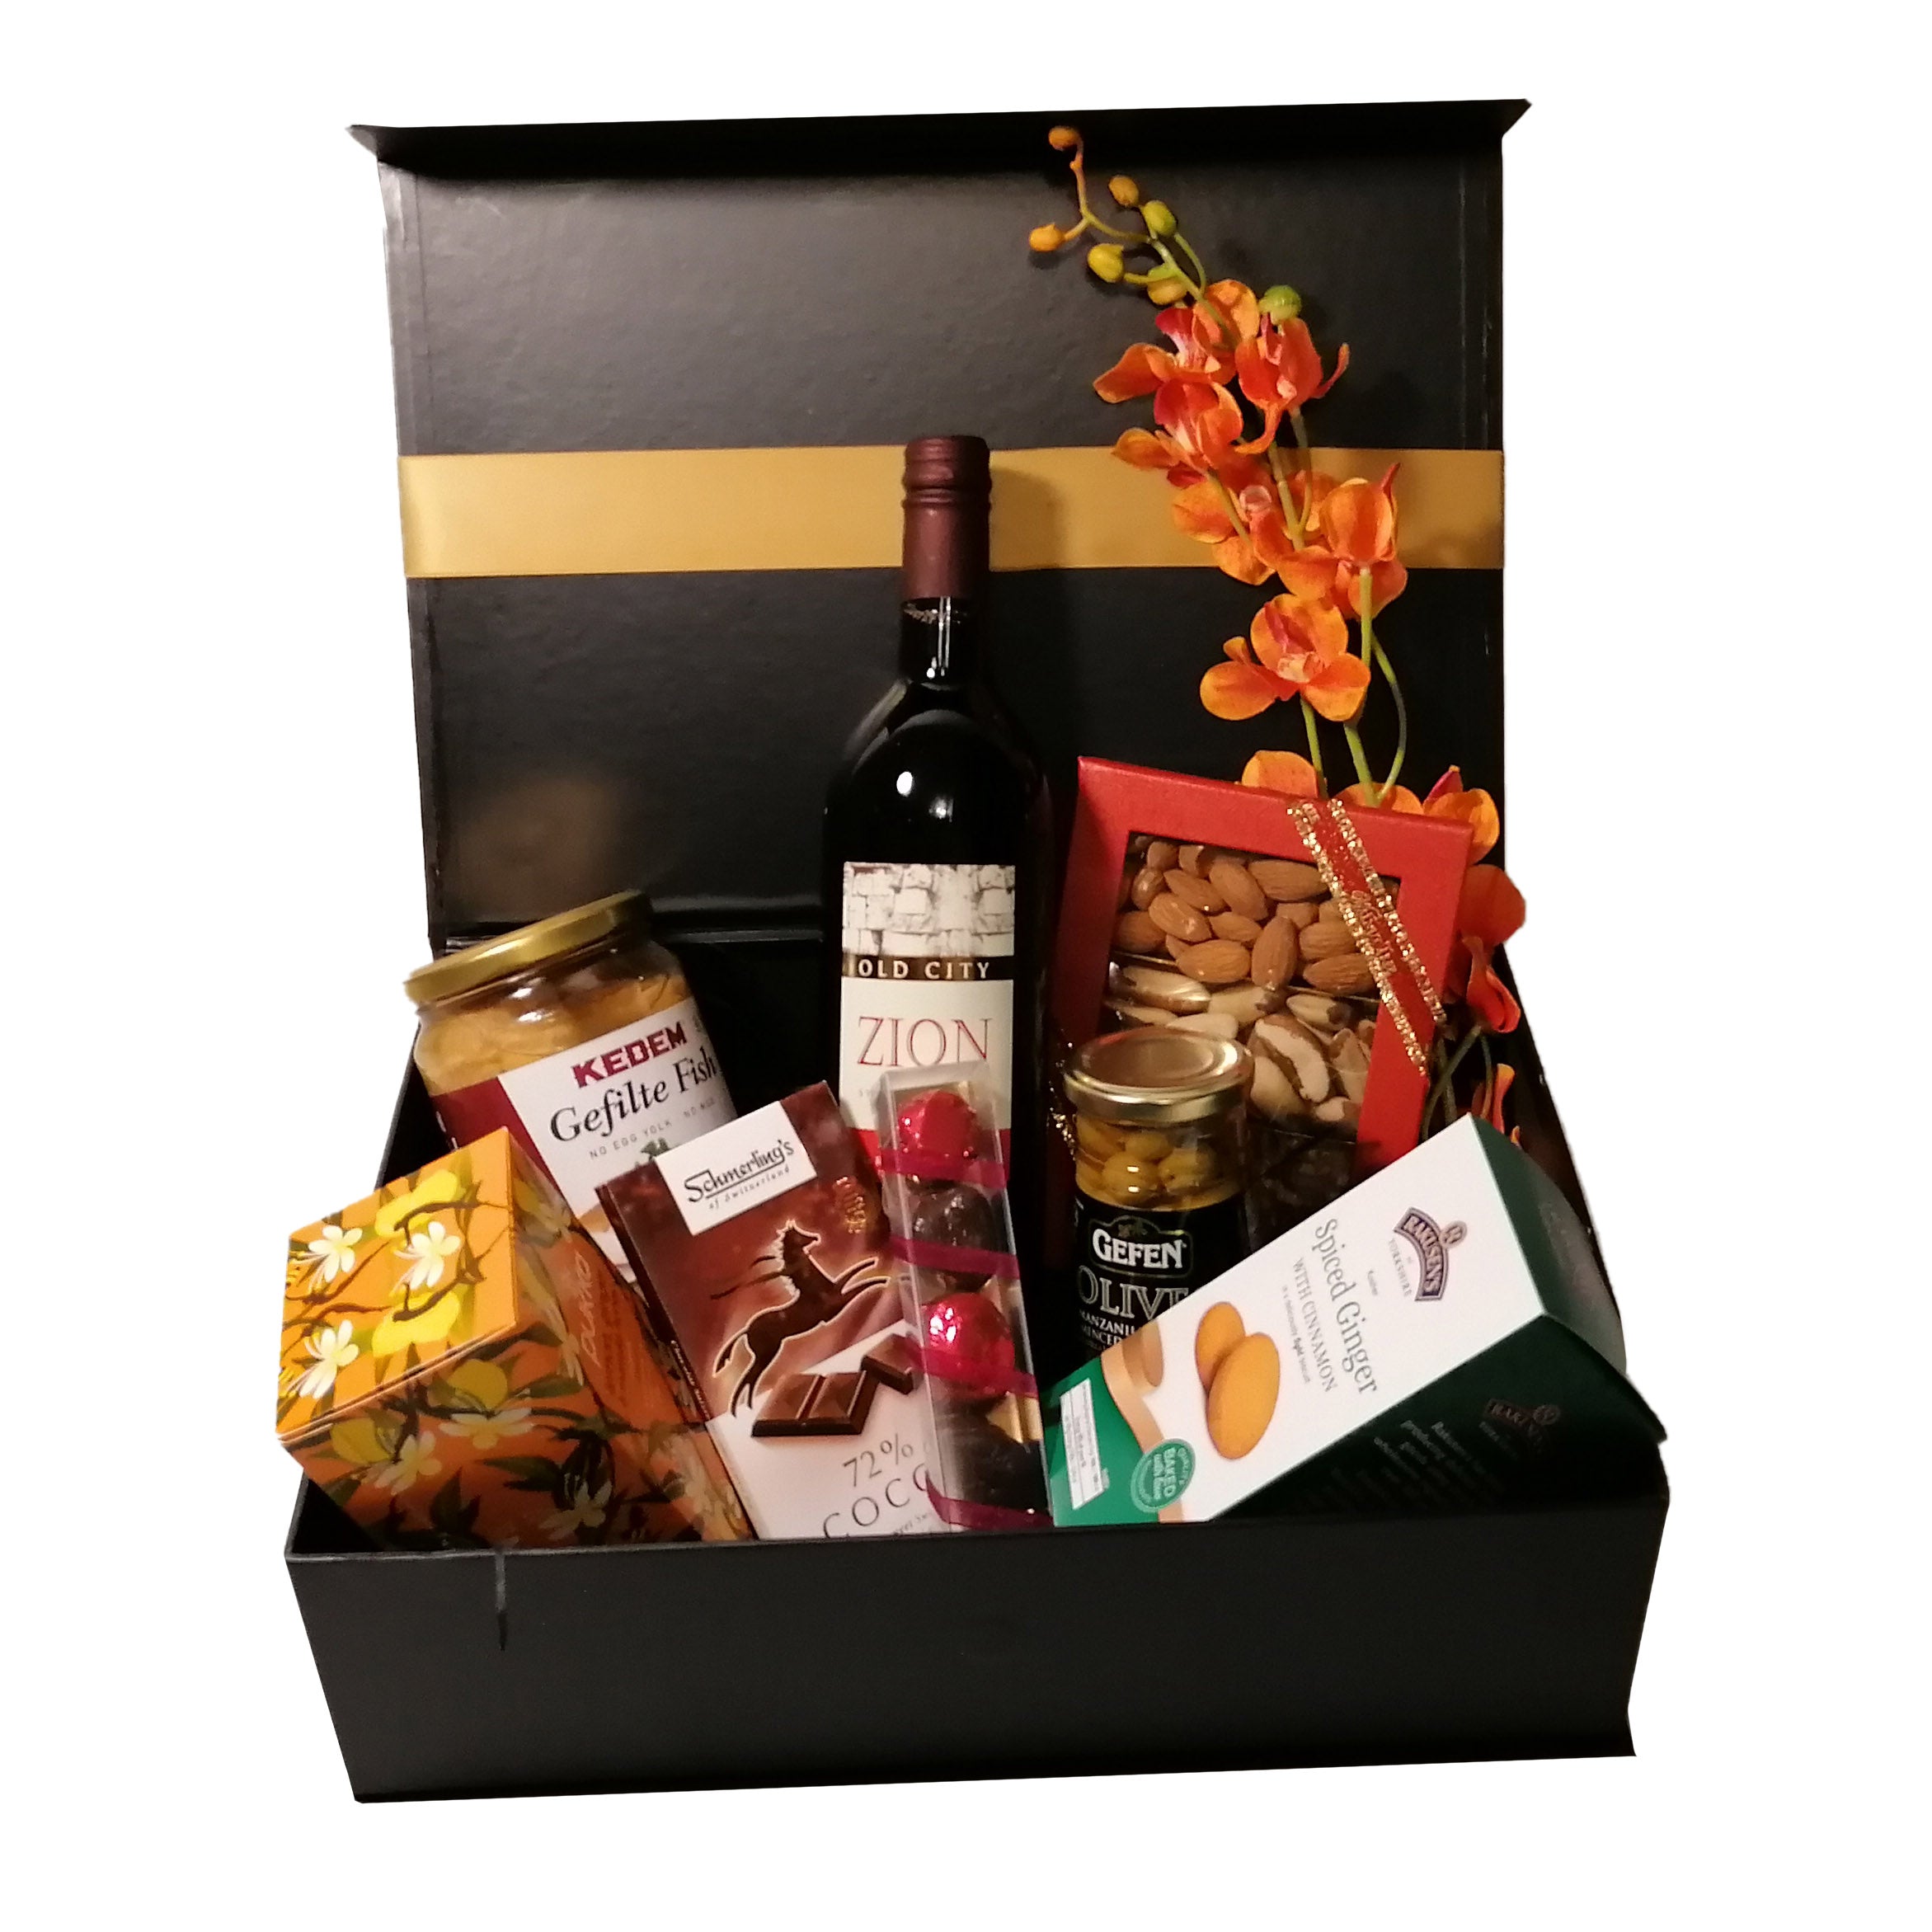 Shabbat. Traditional Shabbat Gift Box With French Wine, Grape Juice or Kiddush Sweet Wine. Gefilte Fish, Biscuits, Olives, Chocolates. A Traditional Shabbat Gift In A Stylish Reusable Gift Box With A Magnetic Closing Lid. Delivered Throughout The UK